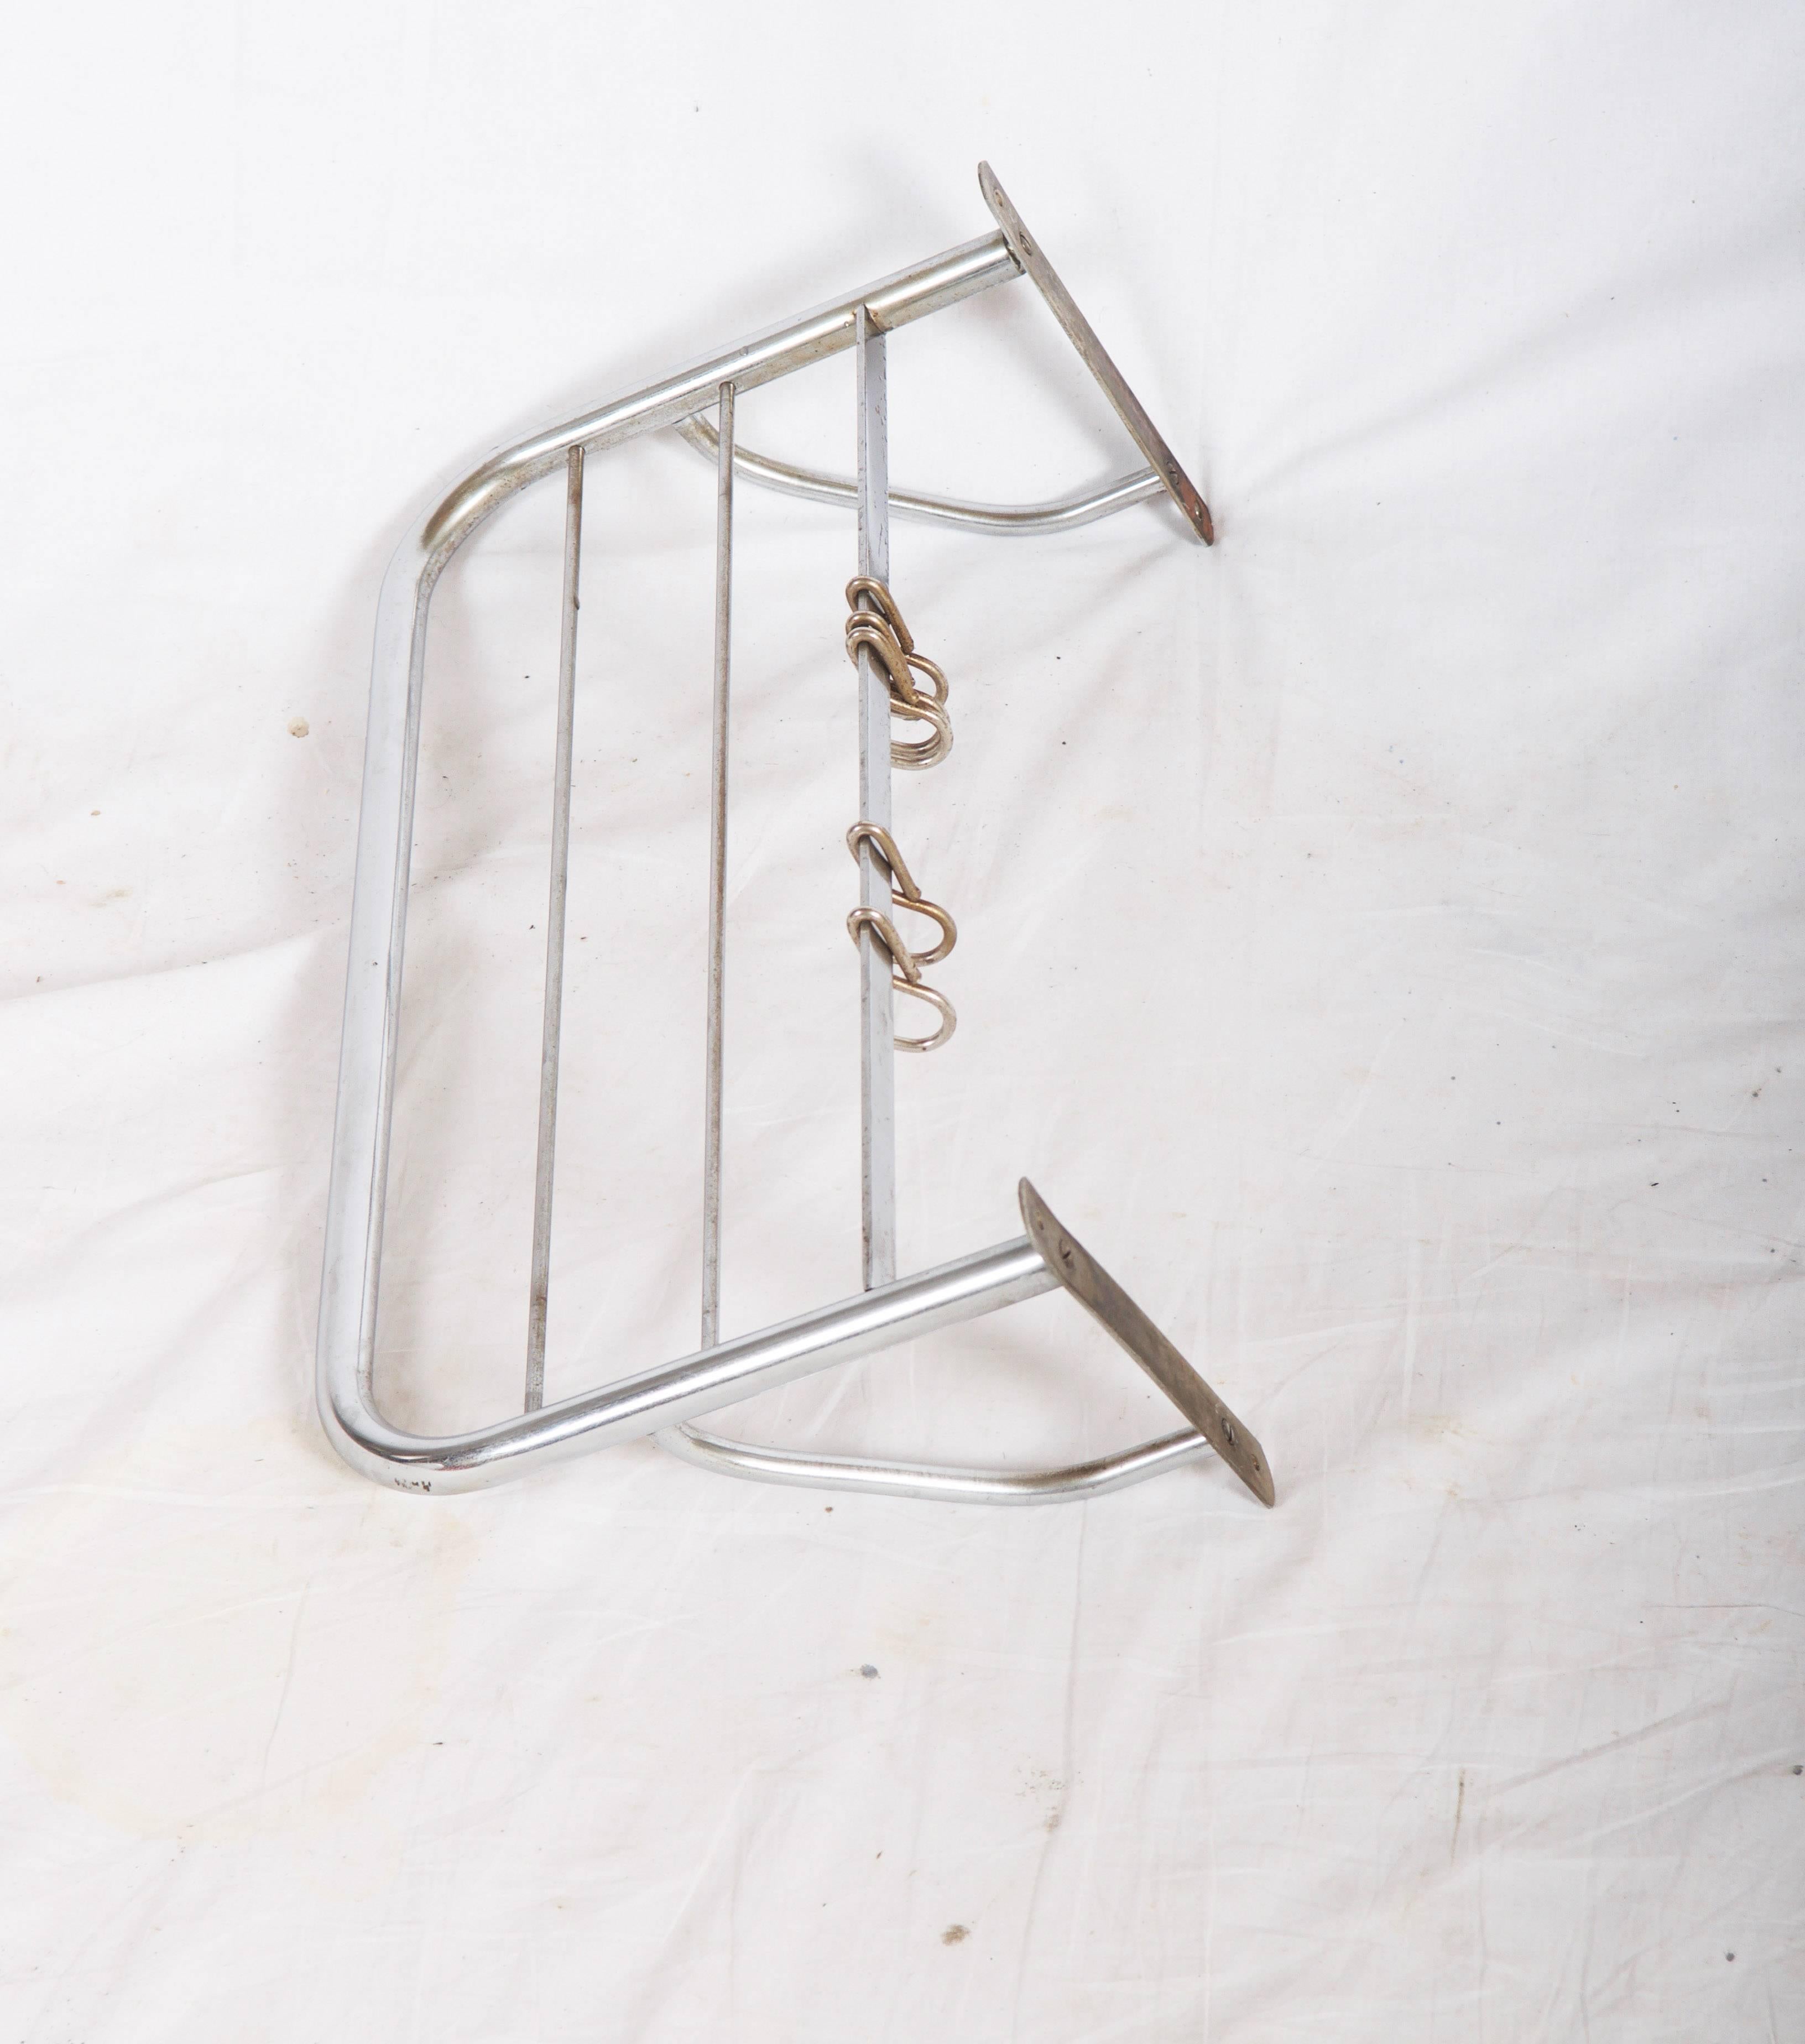 Steel chromed with five hangers and hut shelf.
Up to three available.